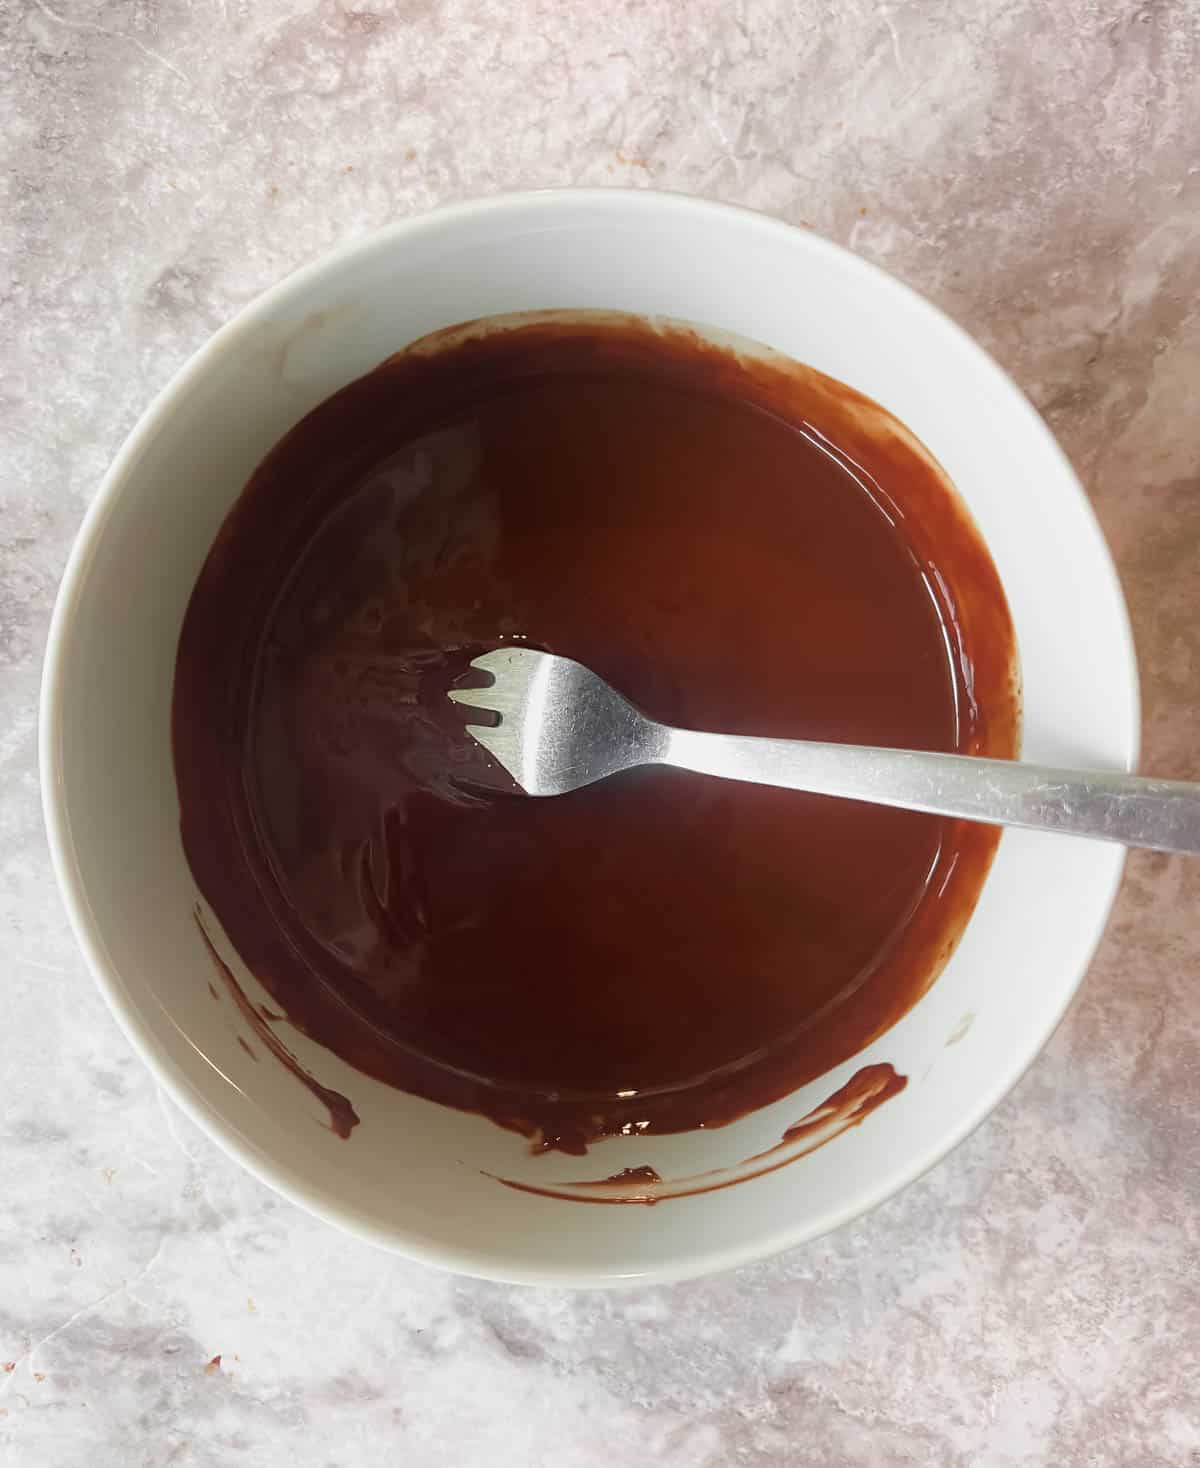 Melted chocolate mixed with coconut oil.